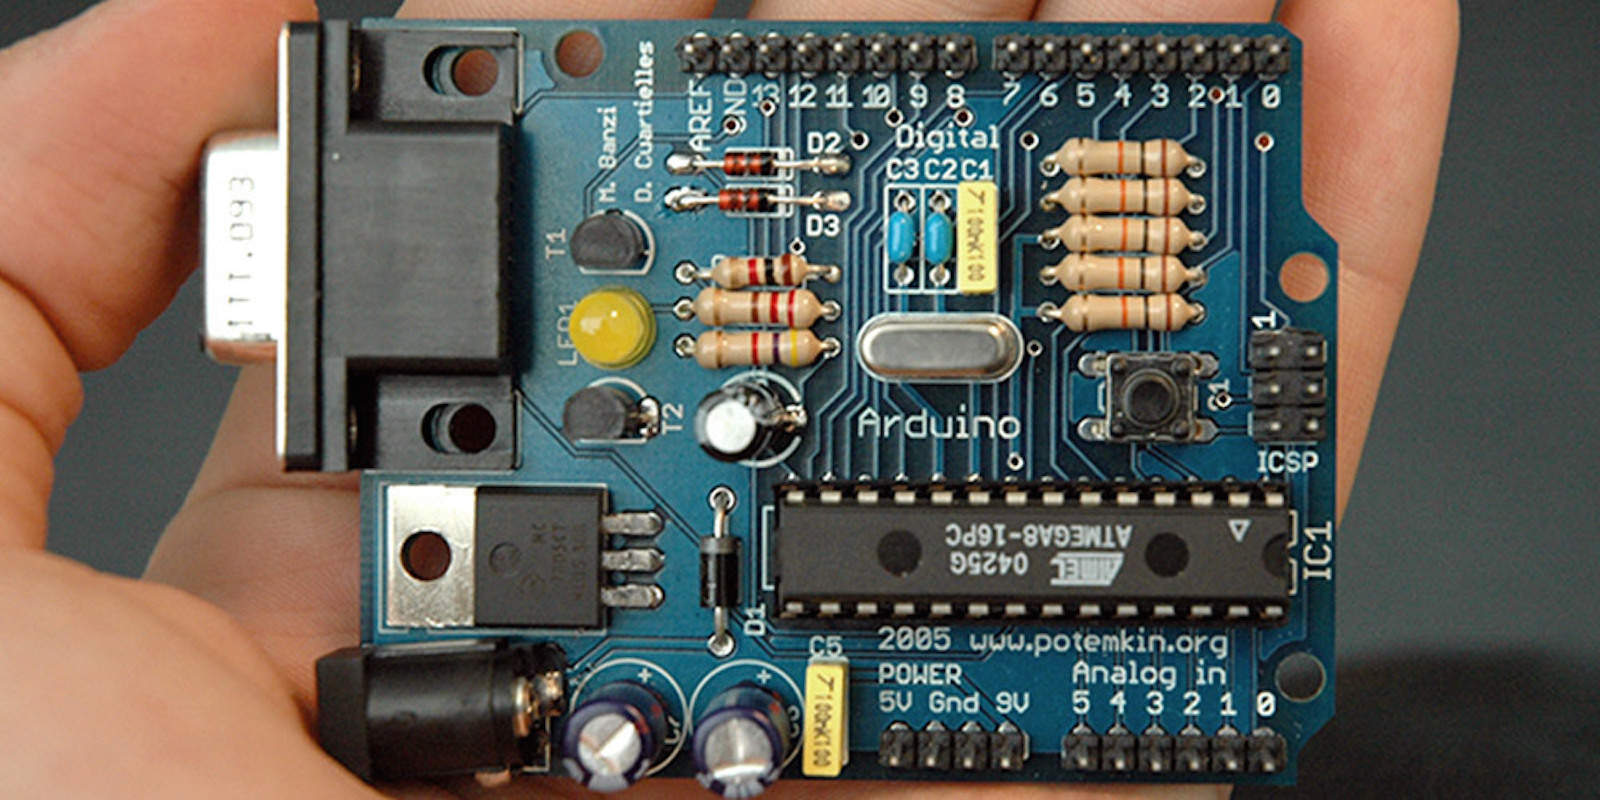 Get the tools and the knowledge you need to build anything you can imagine with Arduino.